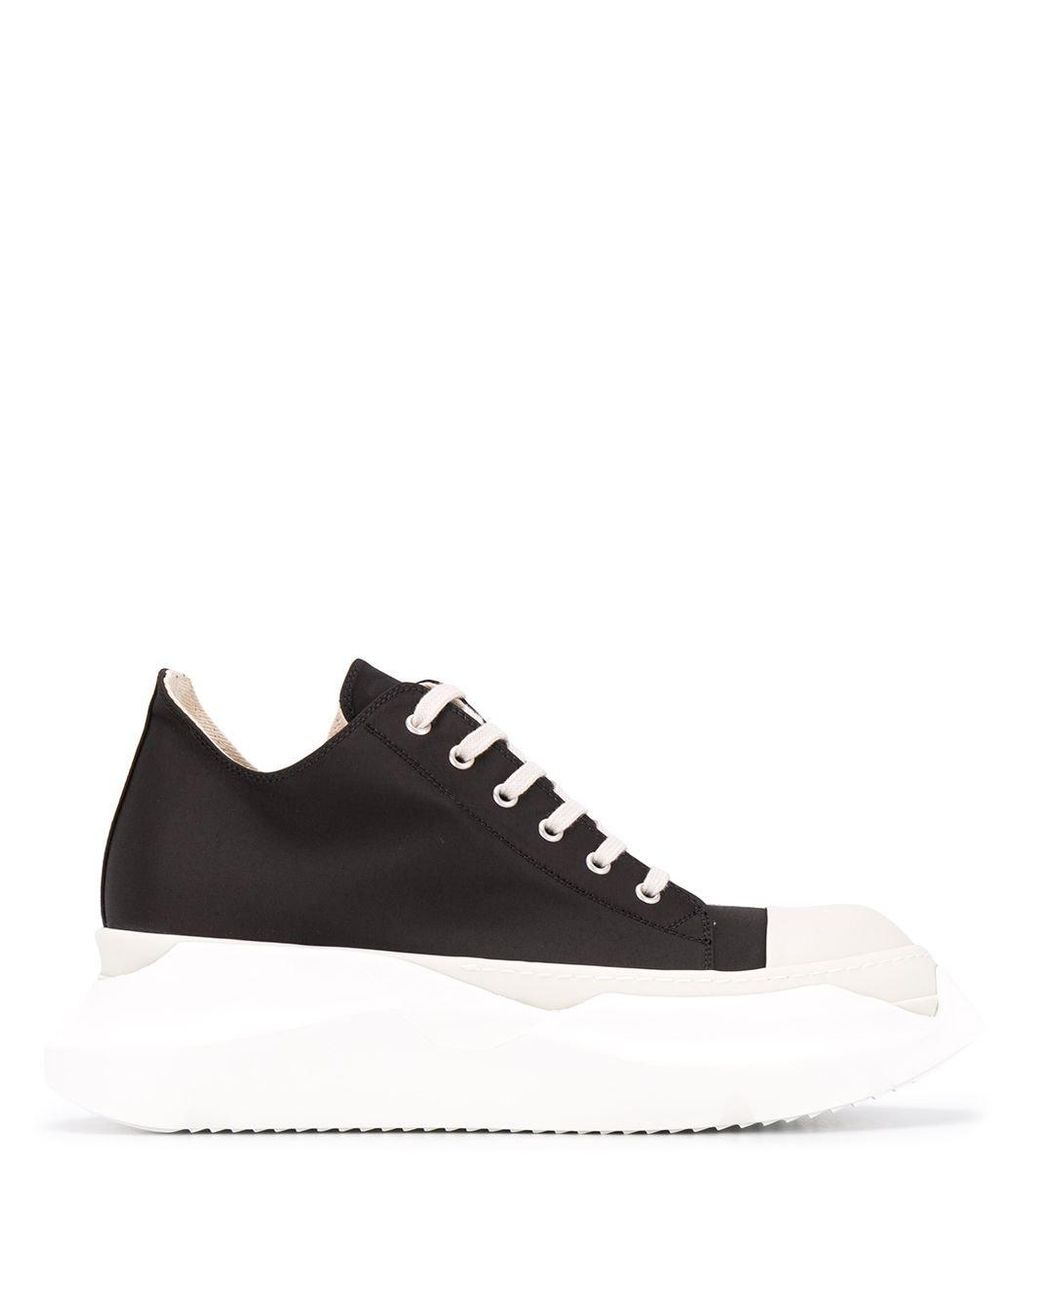 Rick Owens Drkshdw Leather Chunky Lace-up Sneakers in Black for Men - Lyst